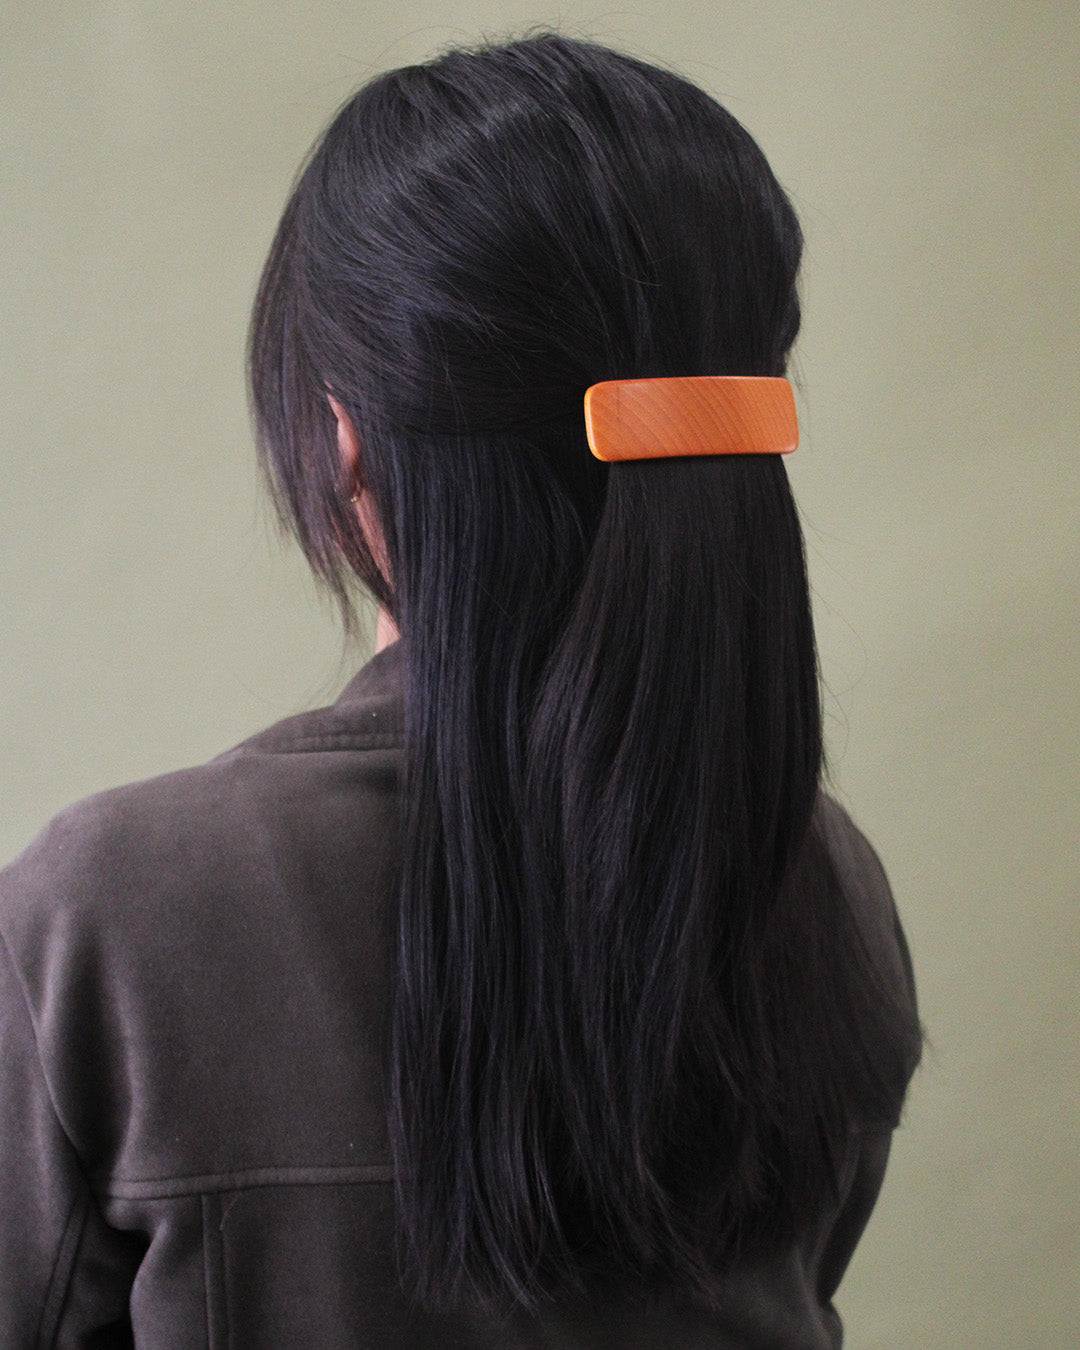 person with long black hair wearing it half up clipped with a brown wooden clip.